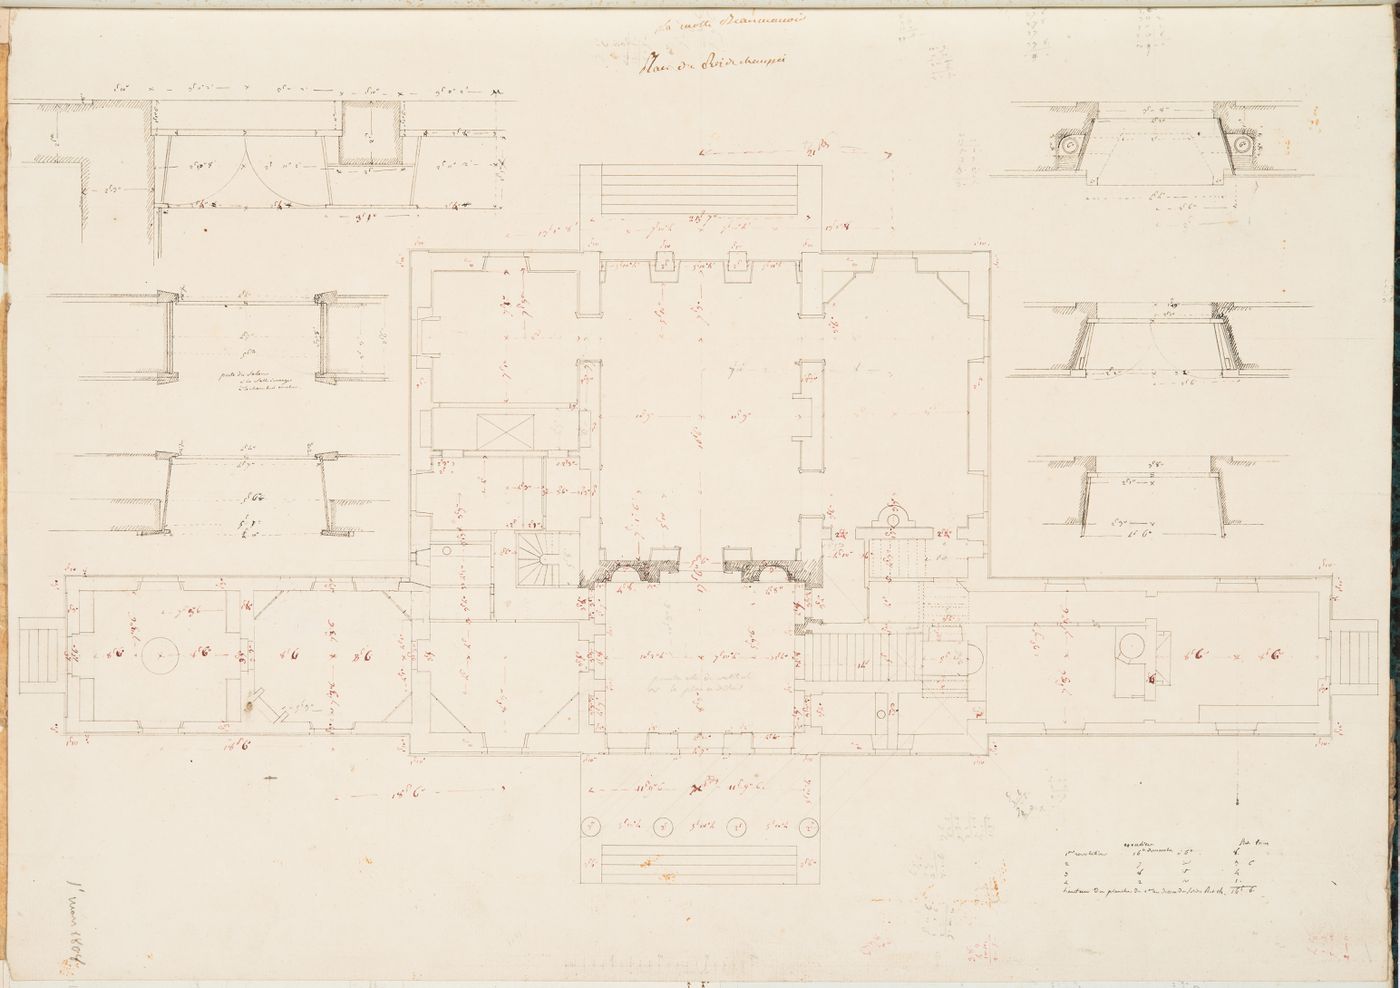 Project for a château for M. de Lorgeril, Motte Beaumanoir: Ground floor plan with plans for the window and door openings